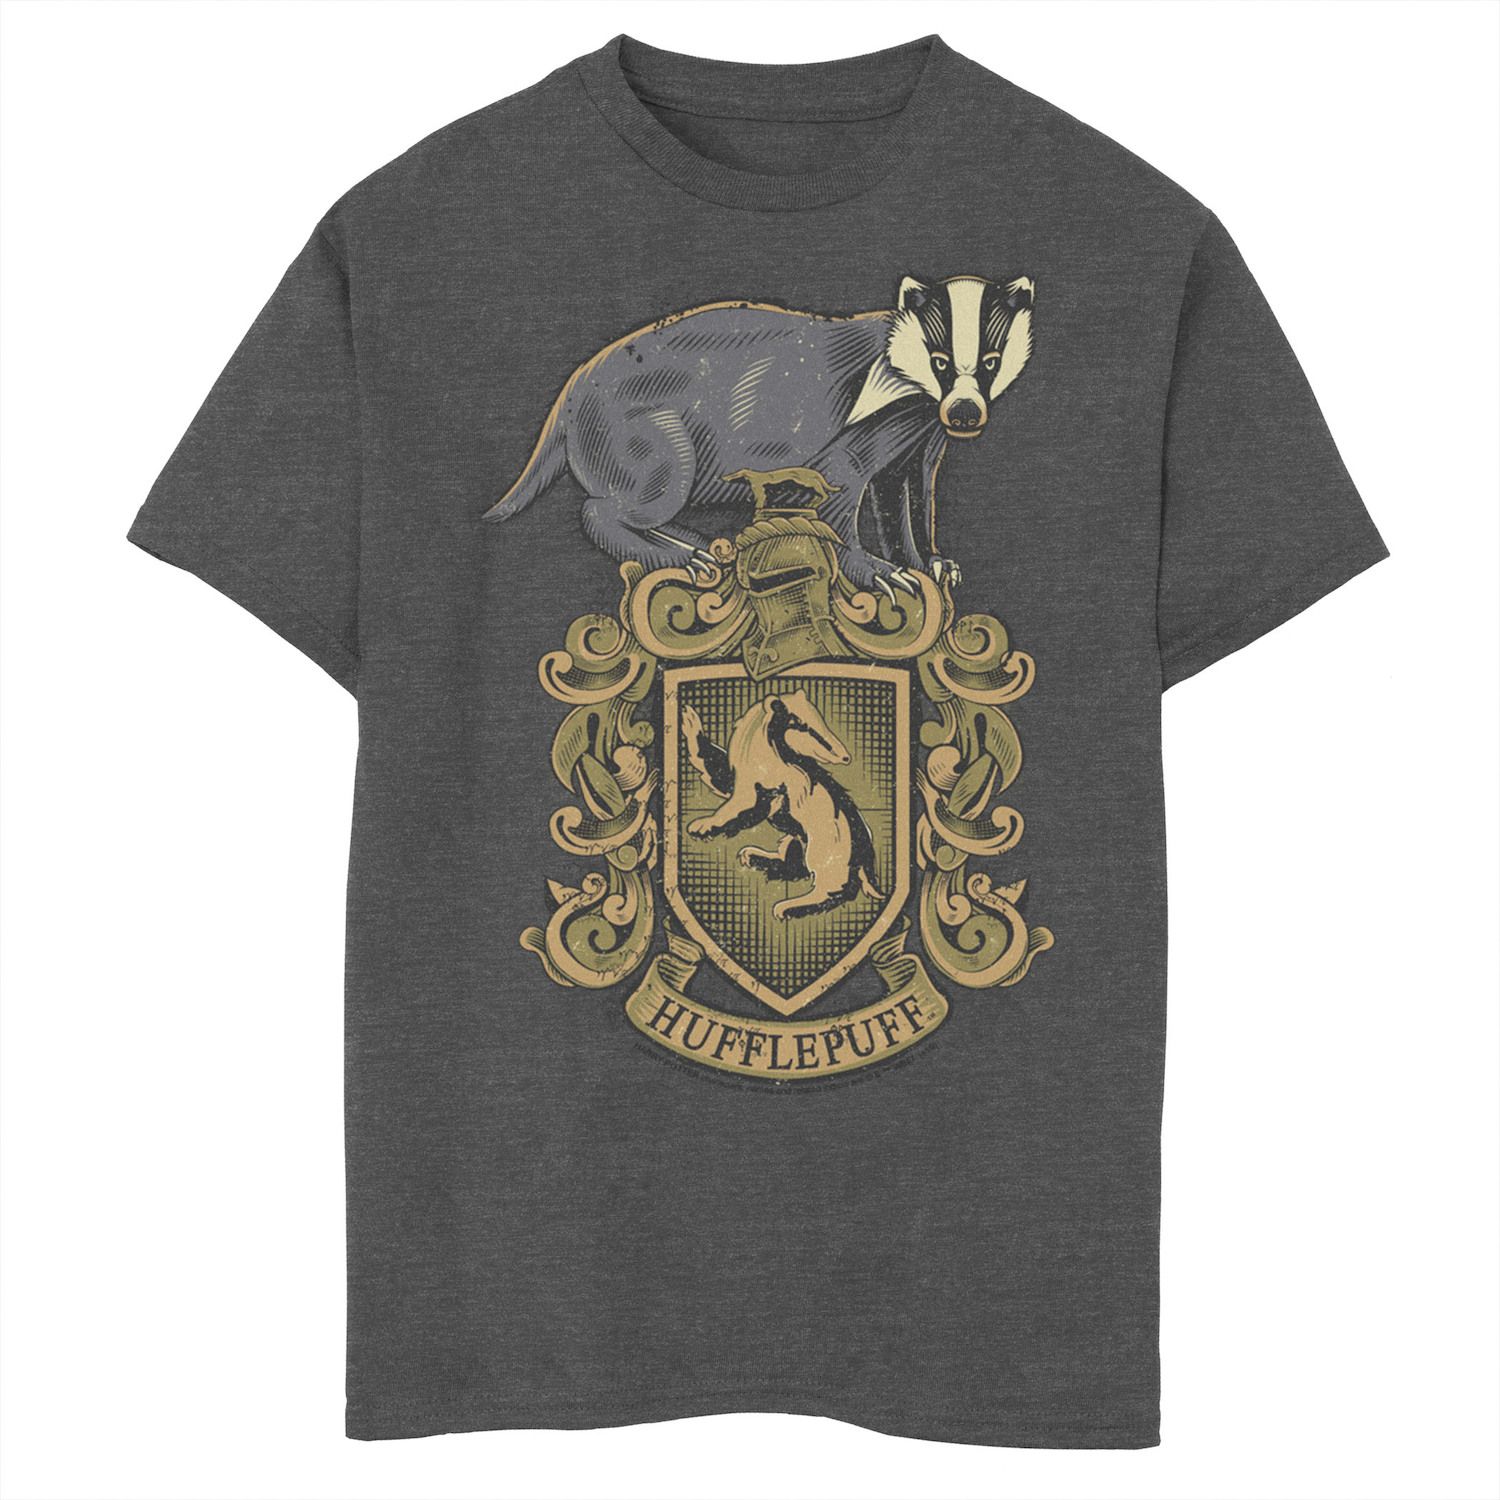 Image for Harry Potter Boys' 8-20 Hufflepuff House Crest Graphic Tee at Kohl's.